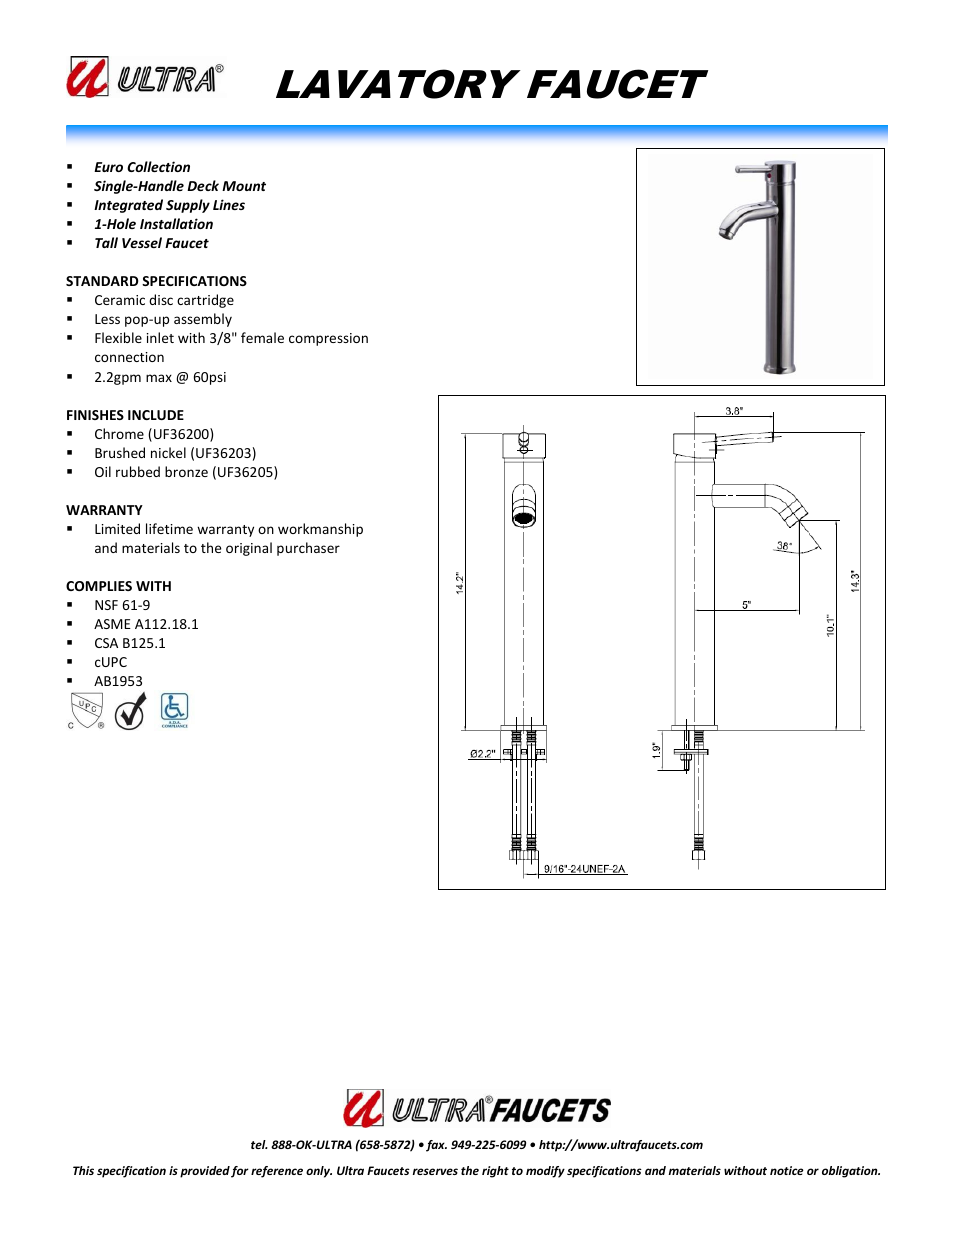 "EURO COLLECTIONSINGLE-HANDLE TALL VESSEL LAVATORY FAUCET"